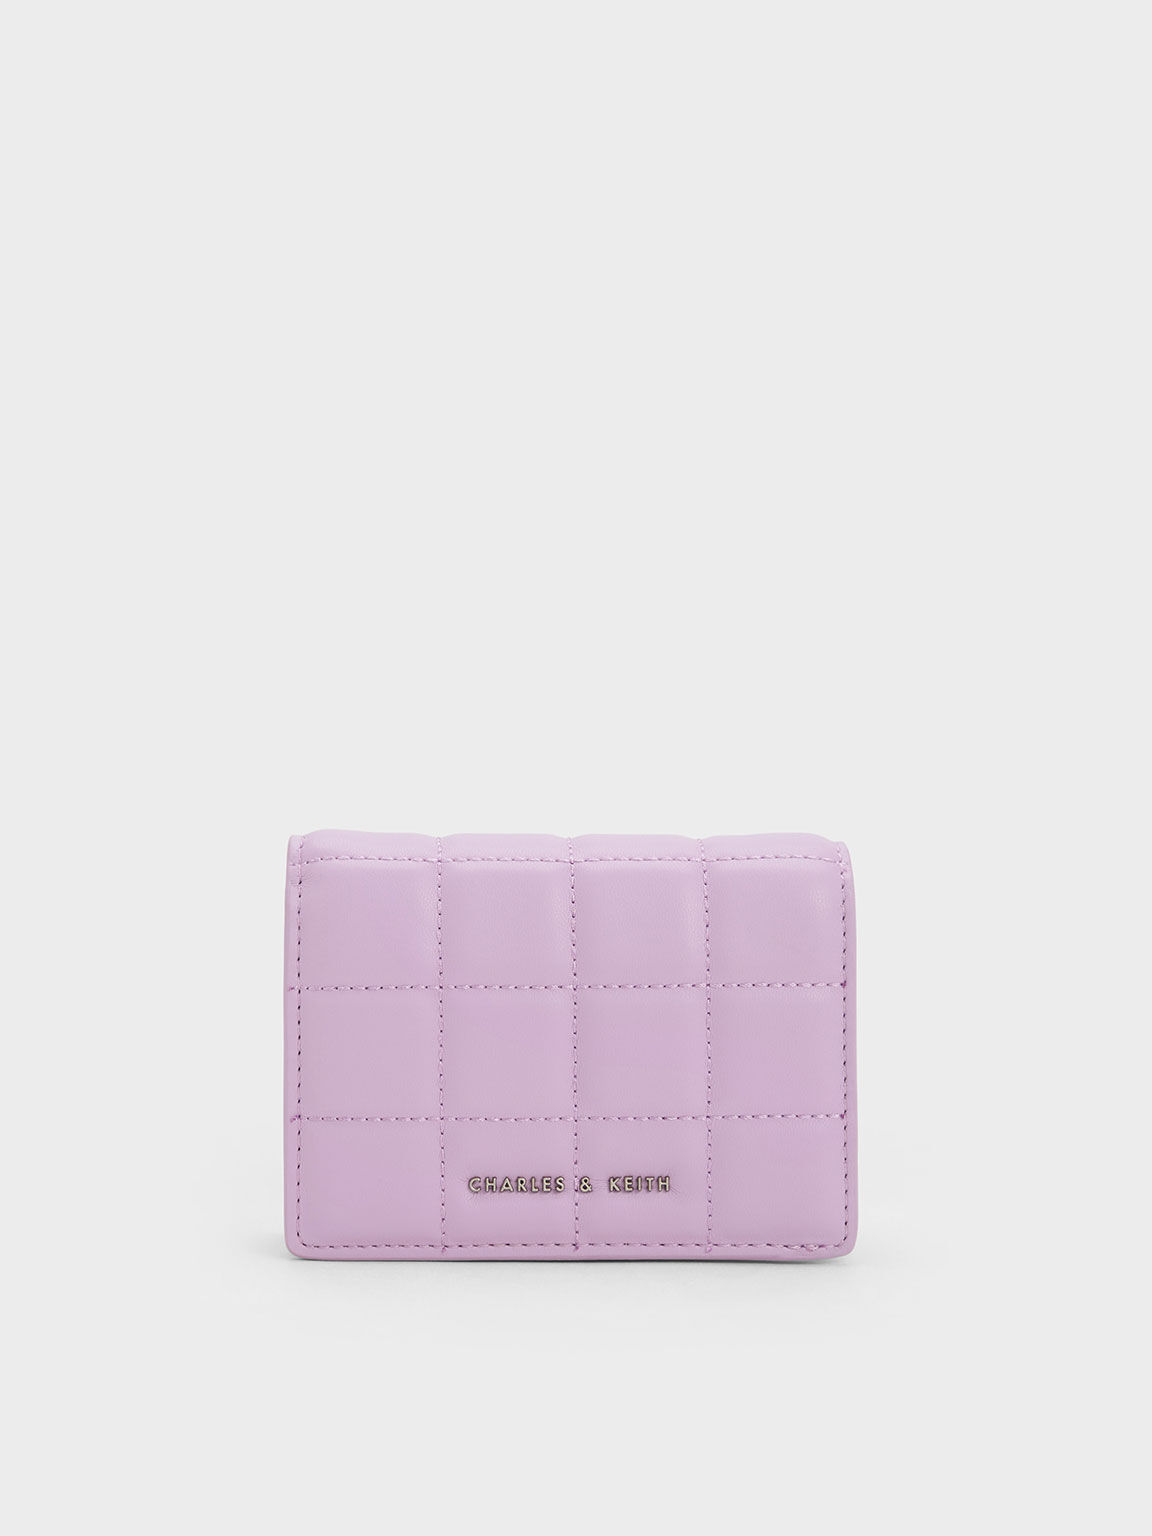 Charles & Keith - Women's Micaela Quilted Card Holder, Pink, Xxs